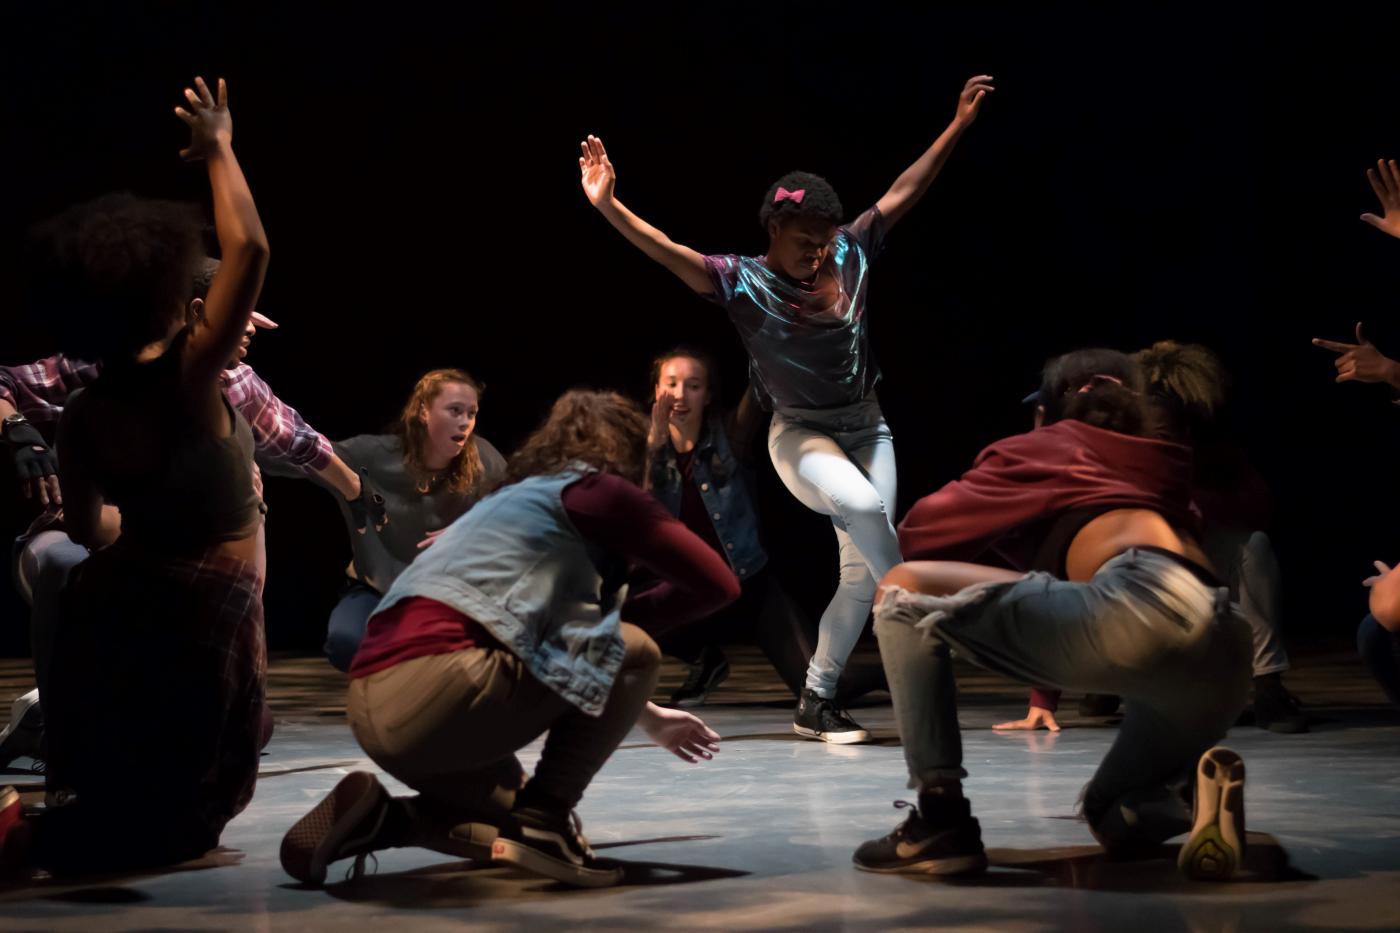 In a spotlight, a group of young dancers performs in a circle.